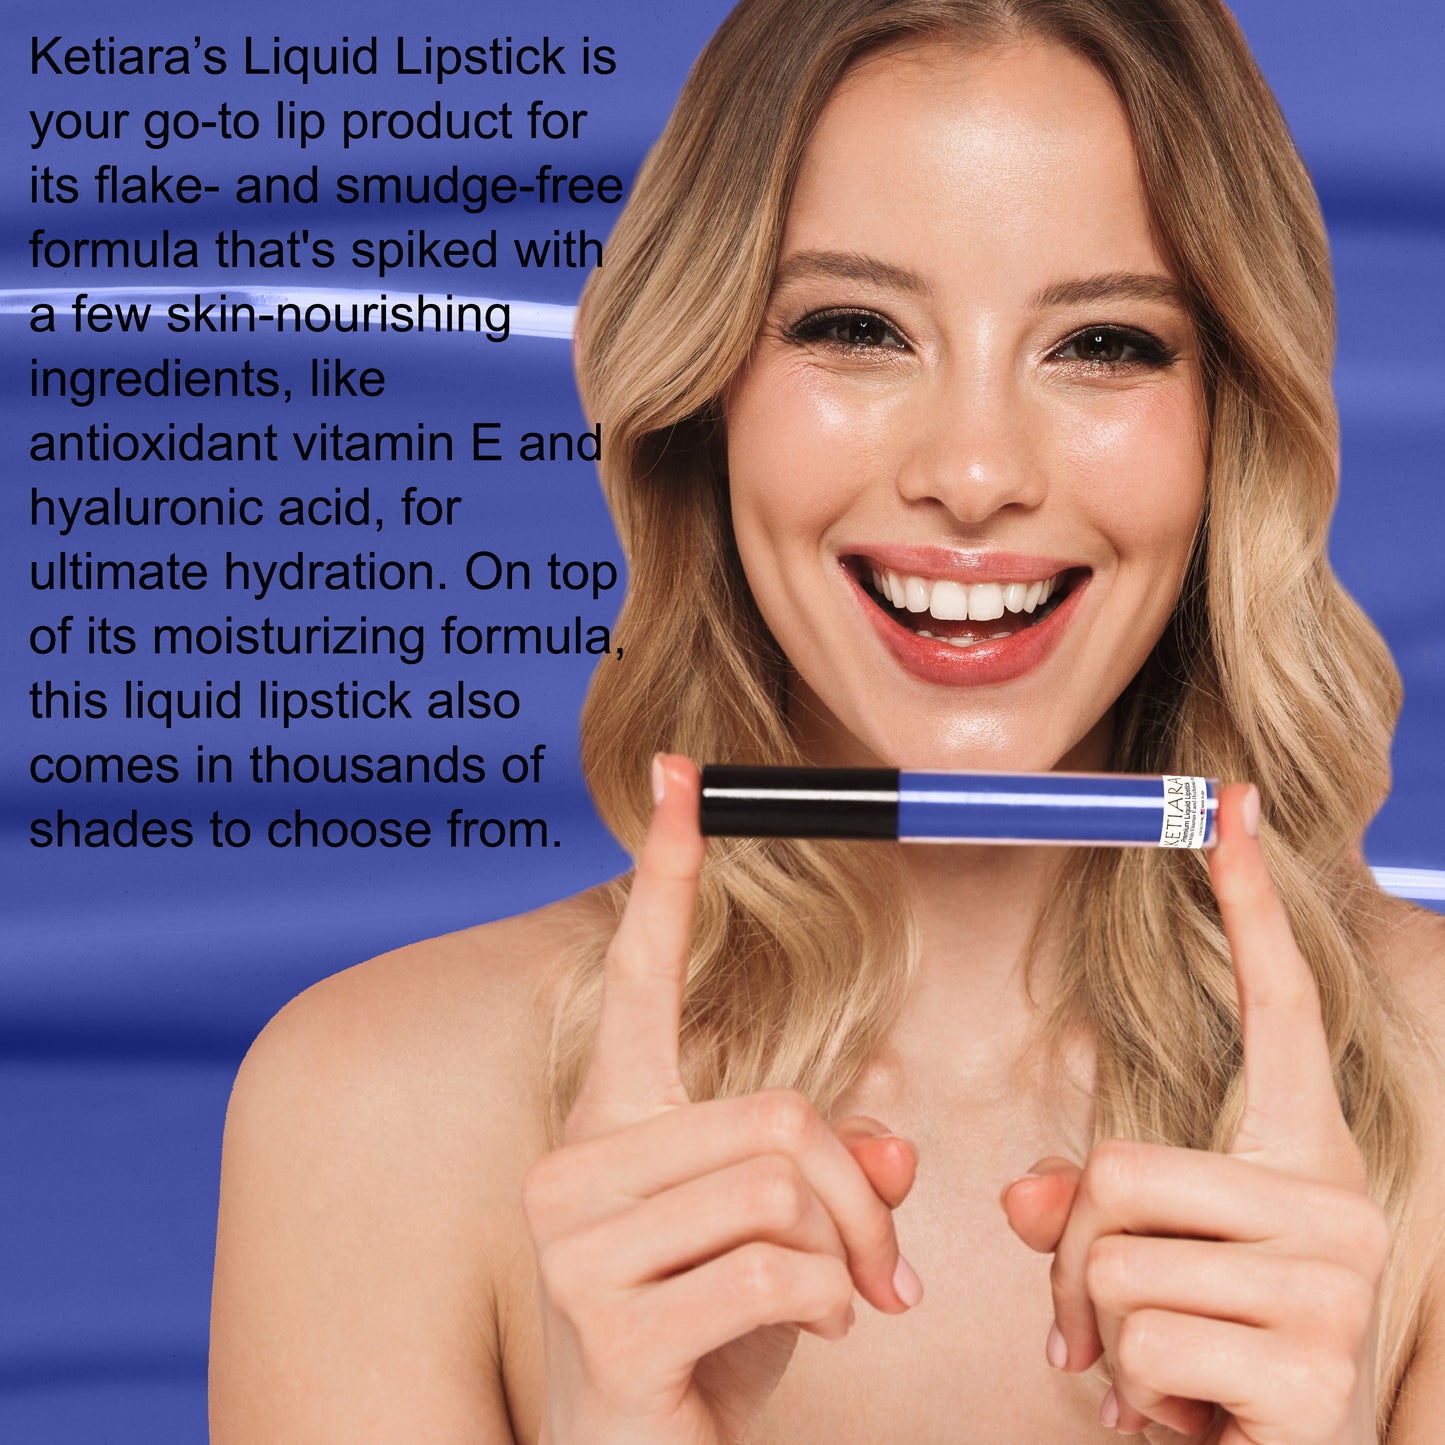 Ketiara Premium Full Coverage Cotton Candy Liquid Lipstick Infused With Hyaluronic Acid, 10 ml